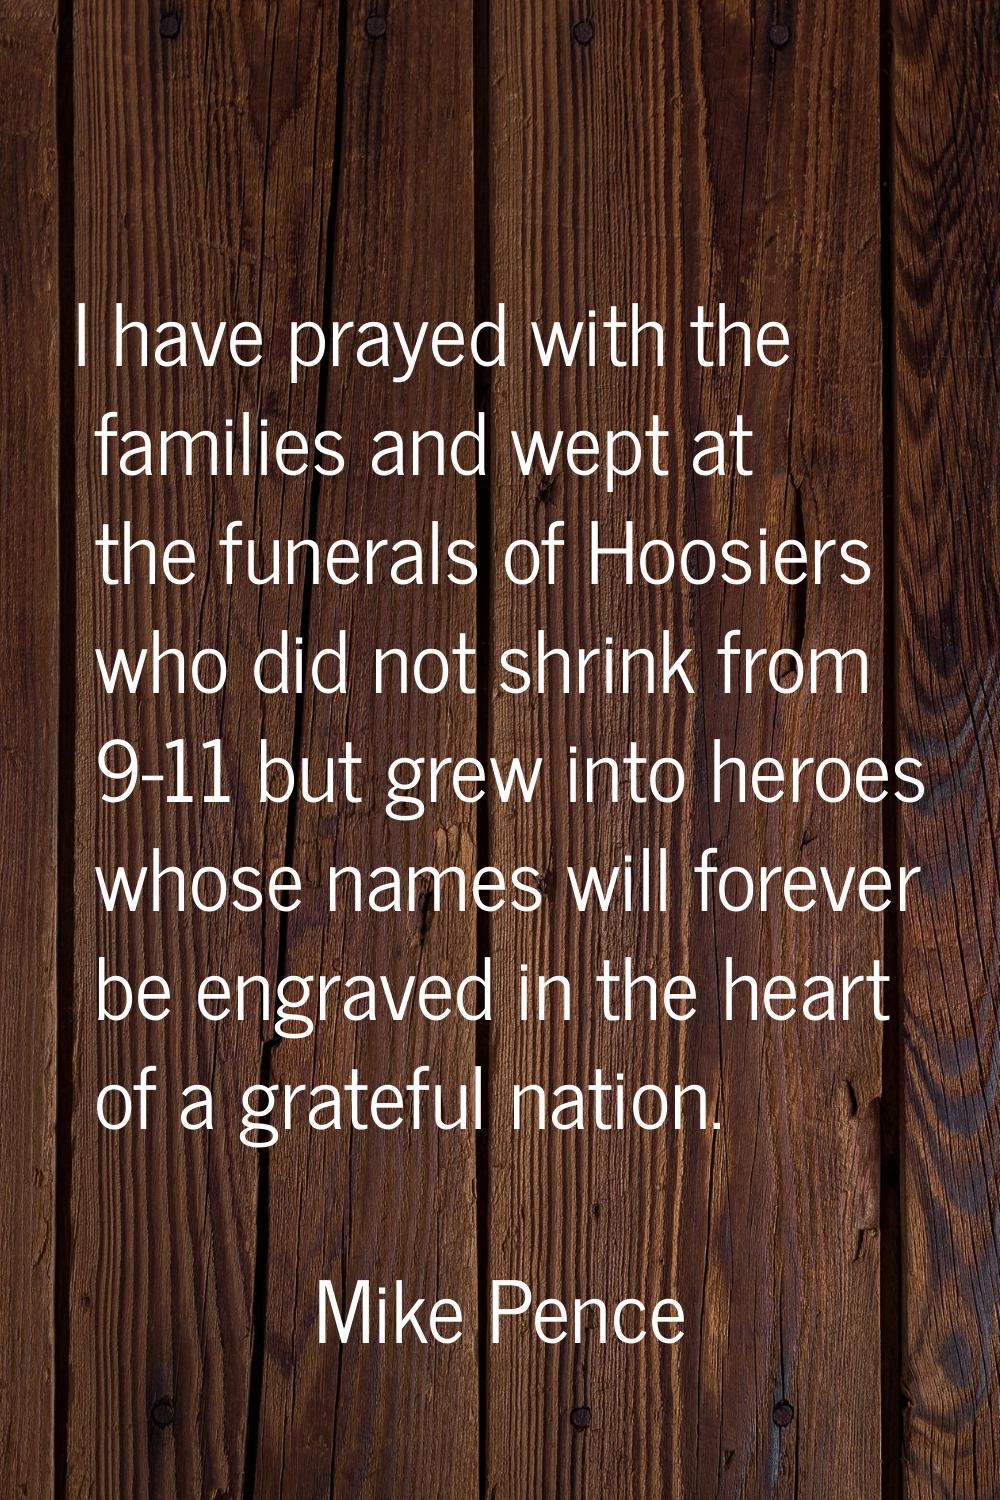 I have prayed with the families and wept at the funerals of Hoosiers who did not shrink from 9-11 b